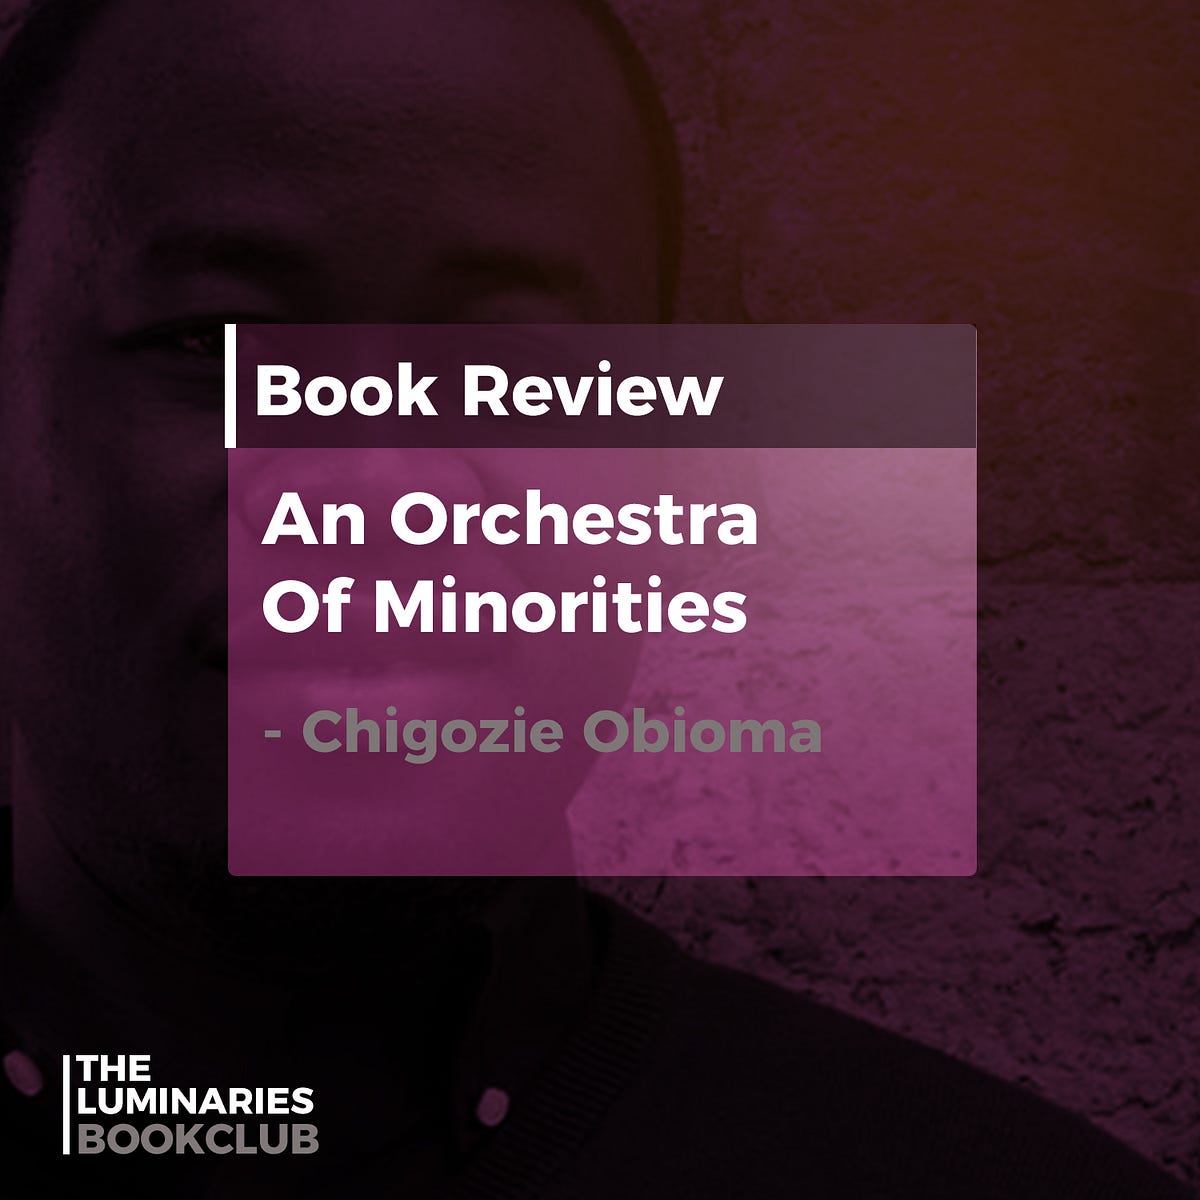 An orchestra of minorities book review